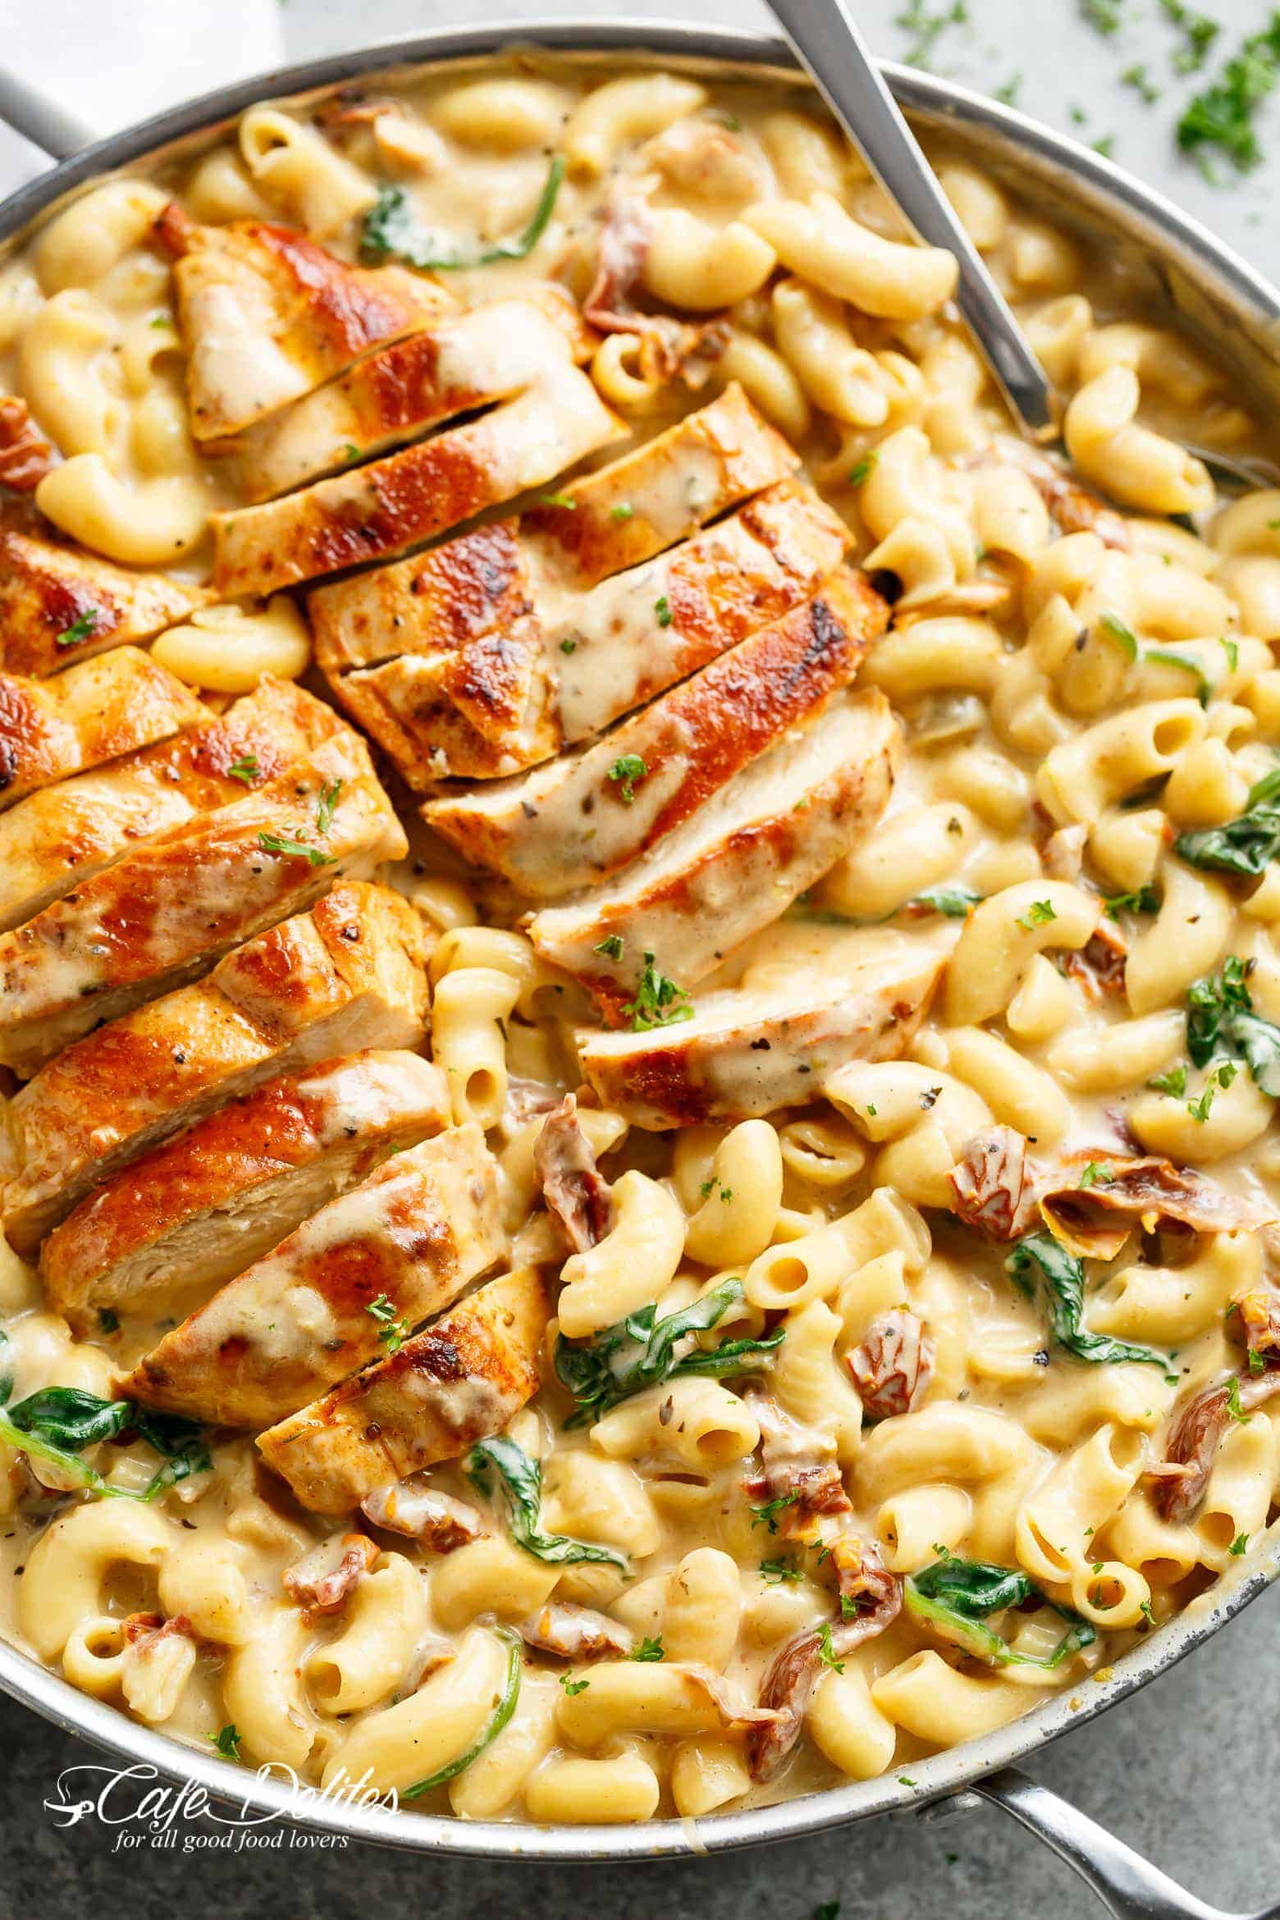 Grilled Chicken With Mac And Cheese Wallpaper